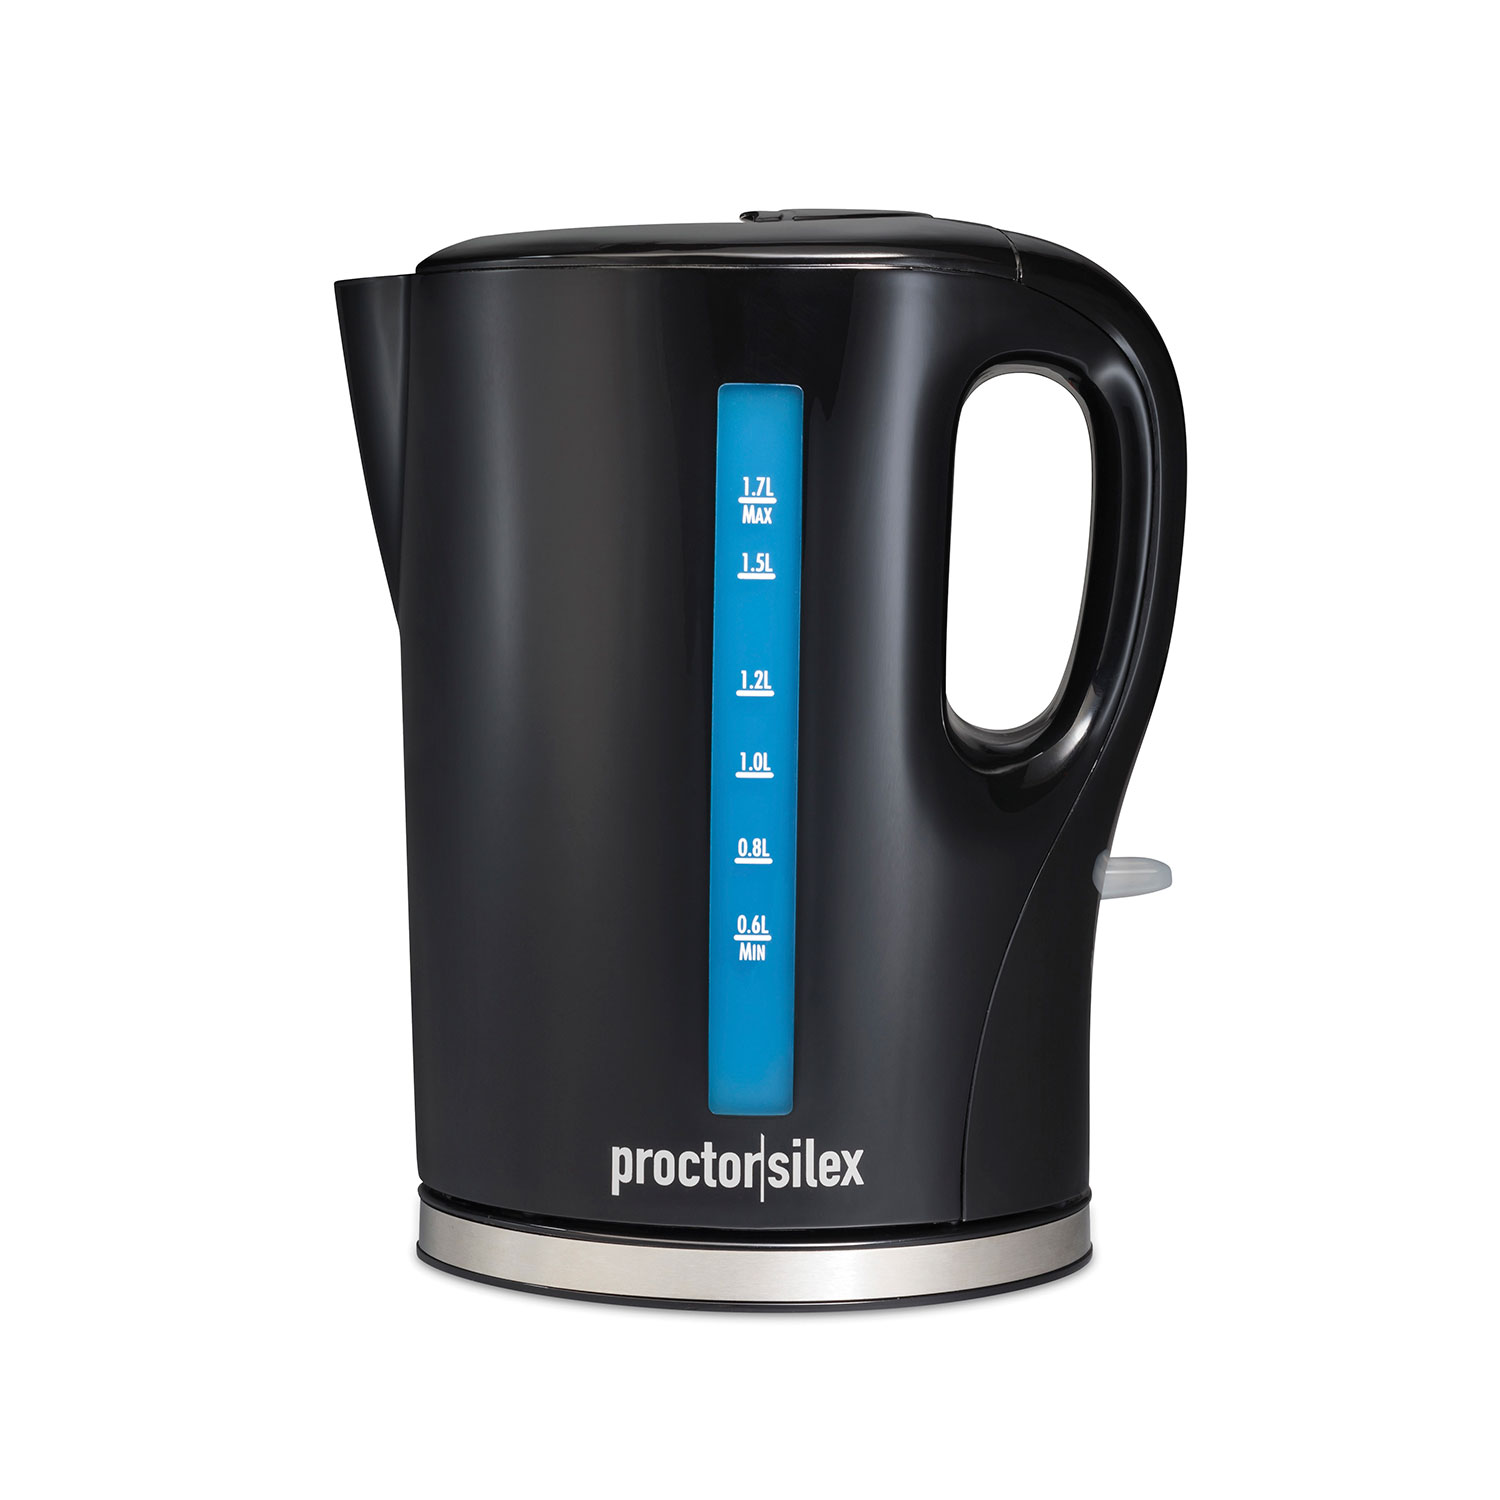 1.7 Liter Cordless Electric Kettle with Auto Shutoff - 41002FG Small Size